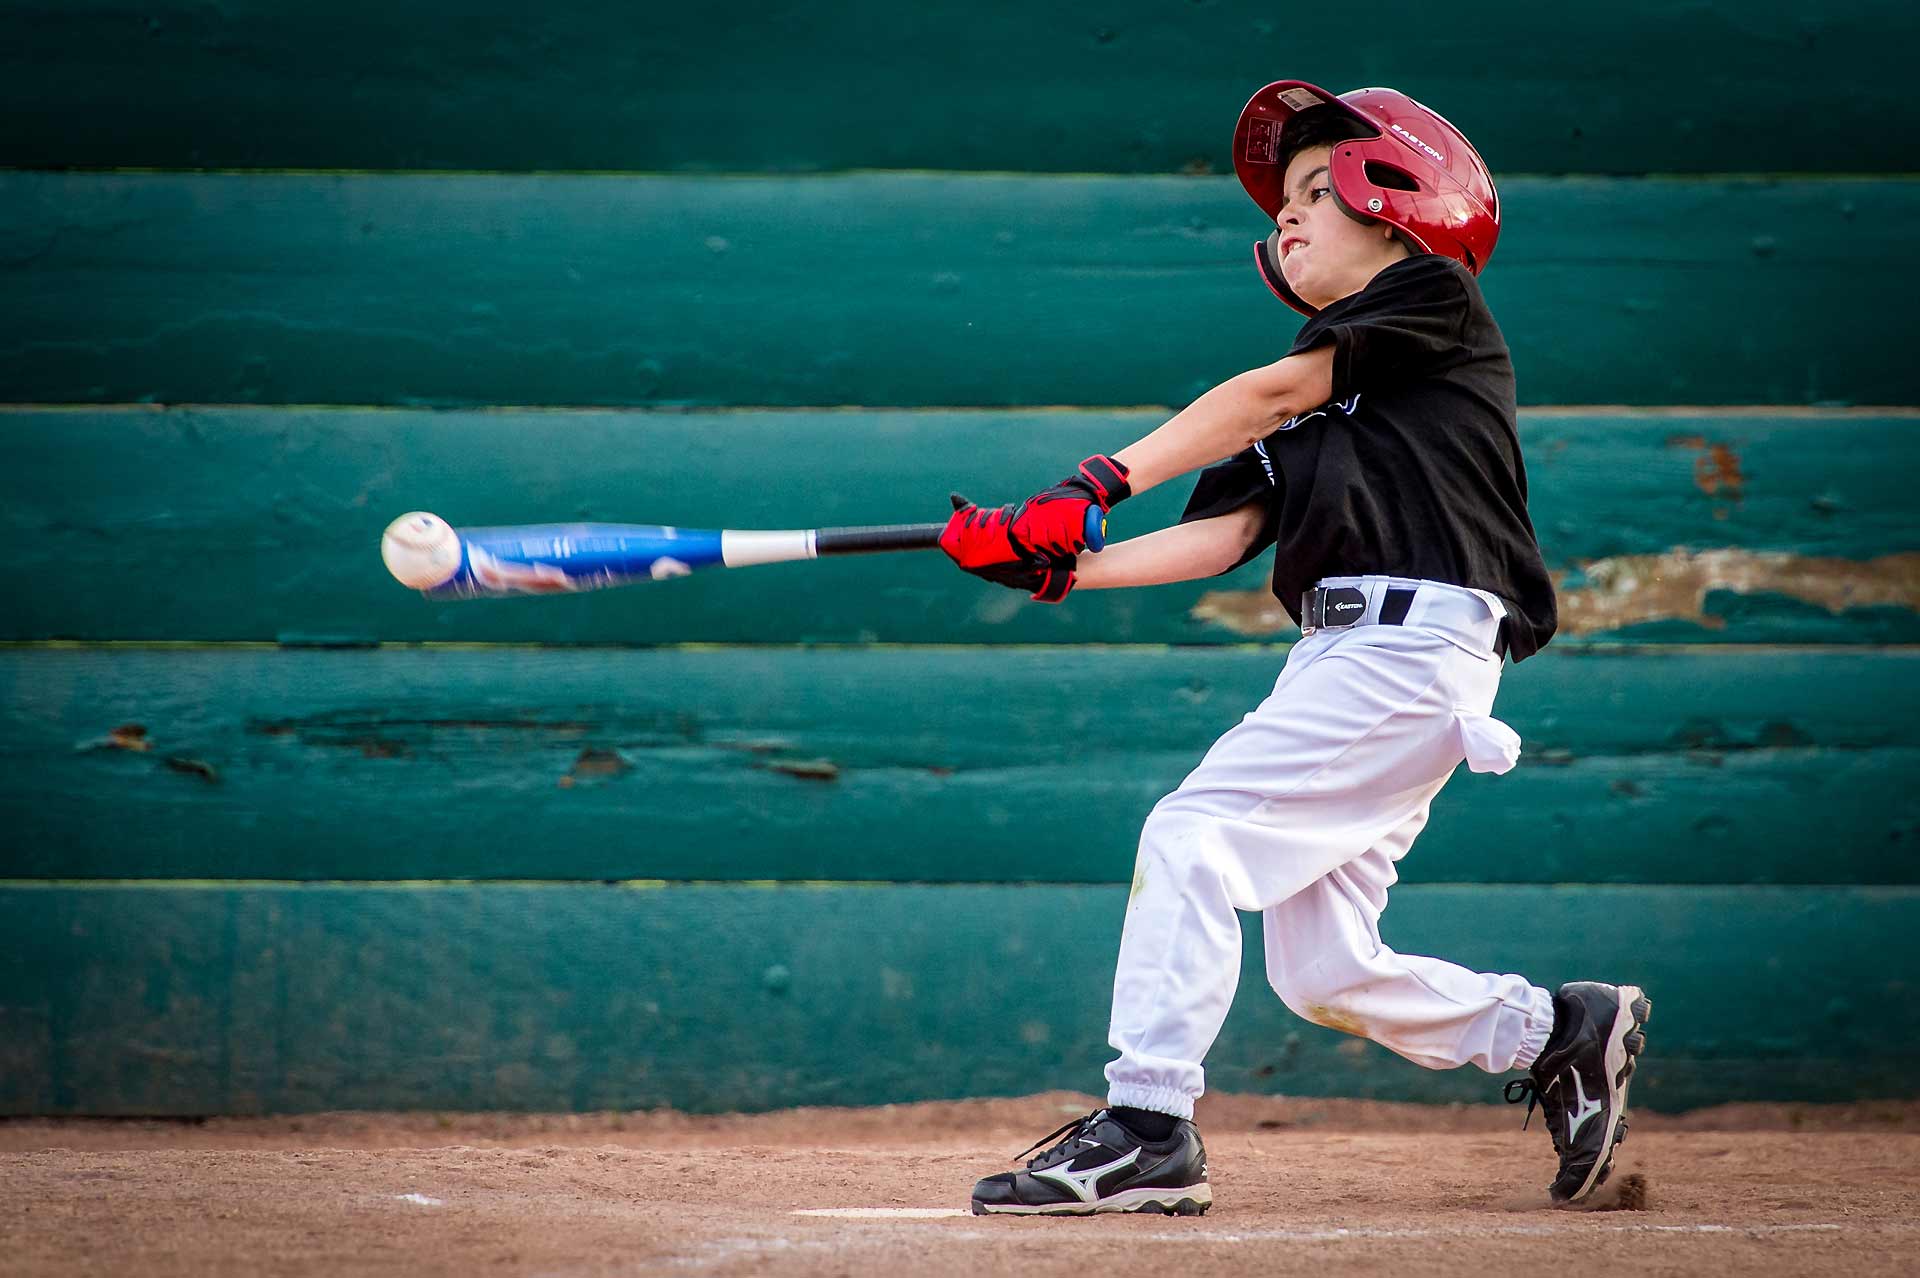 Youth Baseball First Aid Kit Must-haves - eFirstAidSupplies Blog